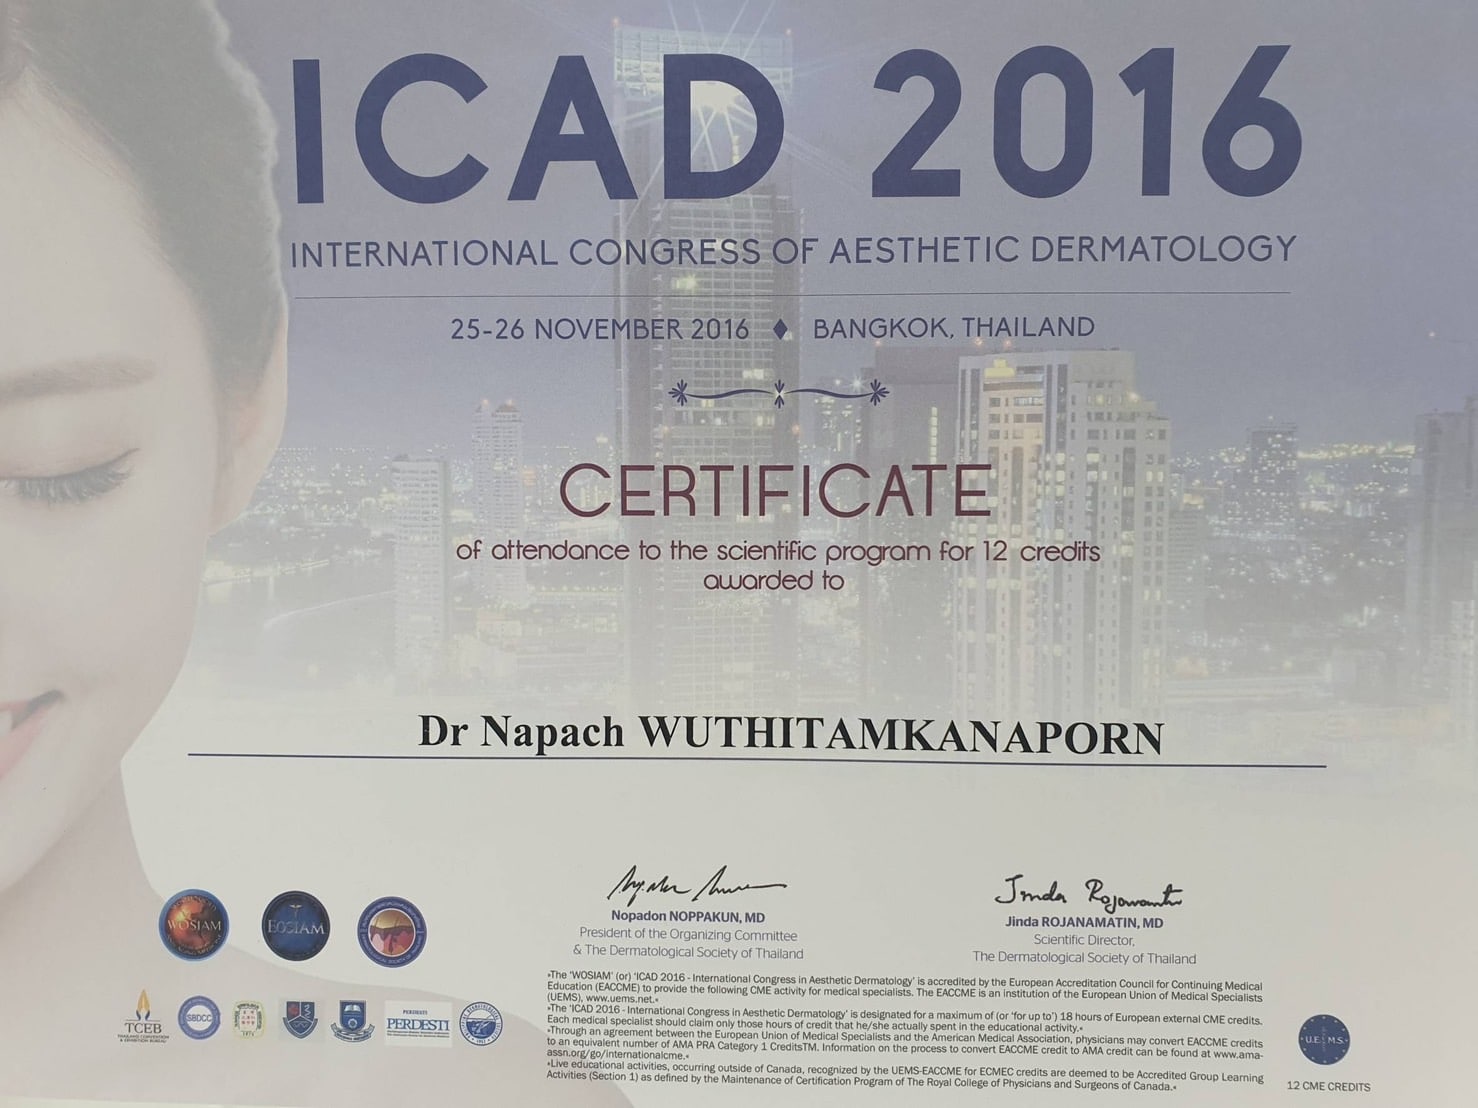 dr-Napach-wuthitamkanaporn-certification-and-traning-2